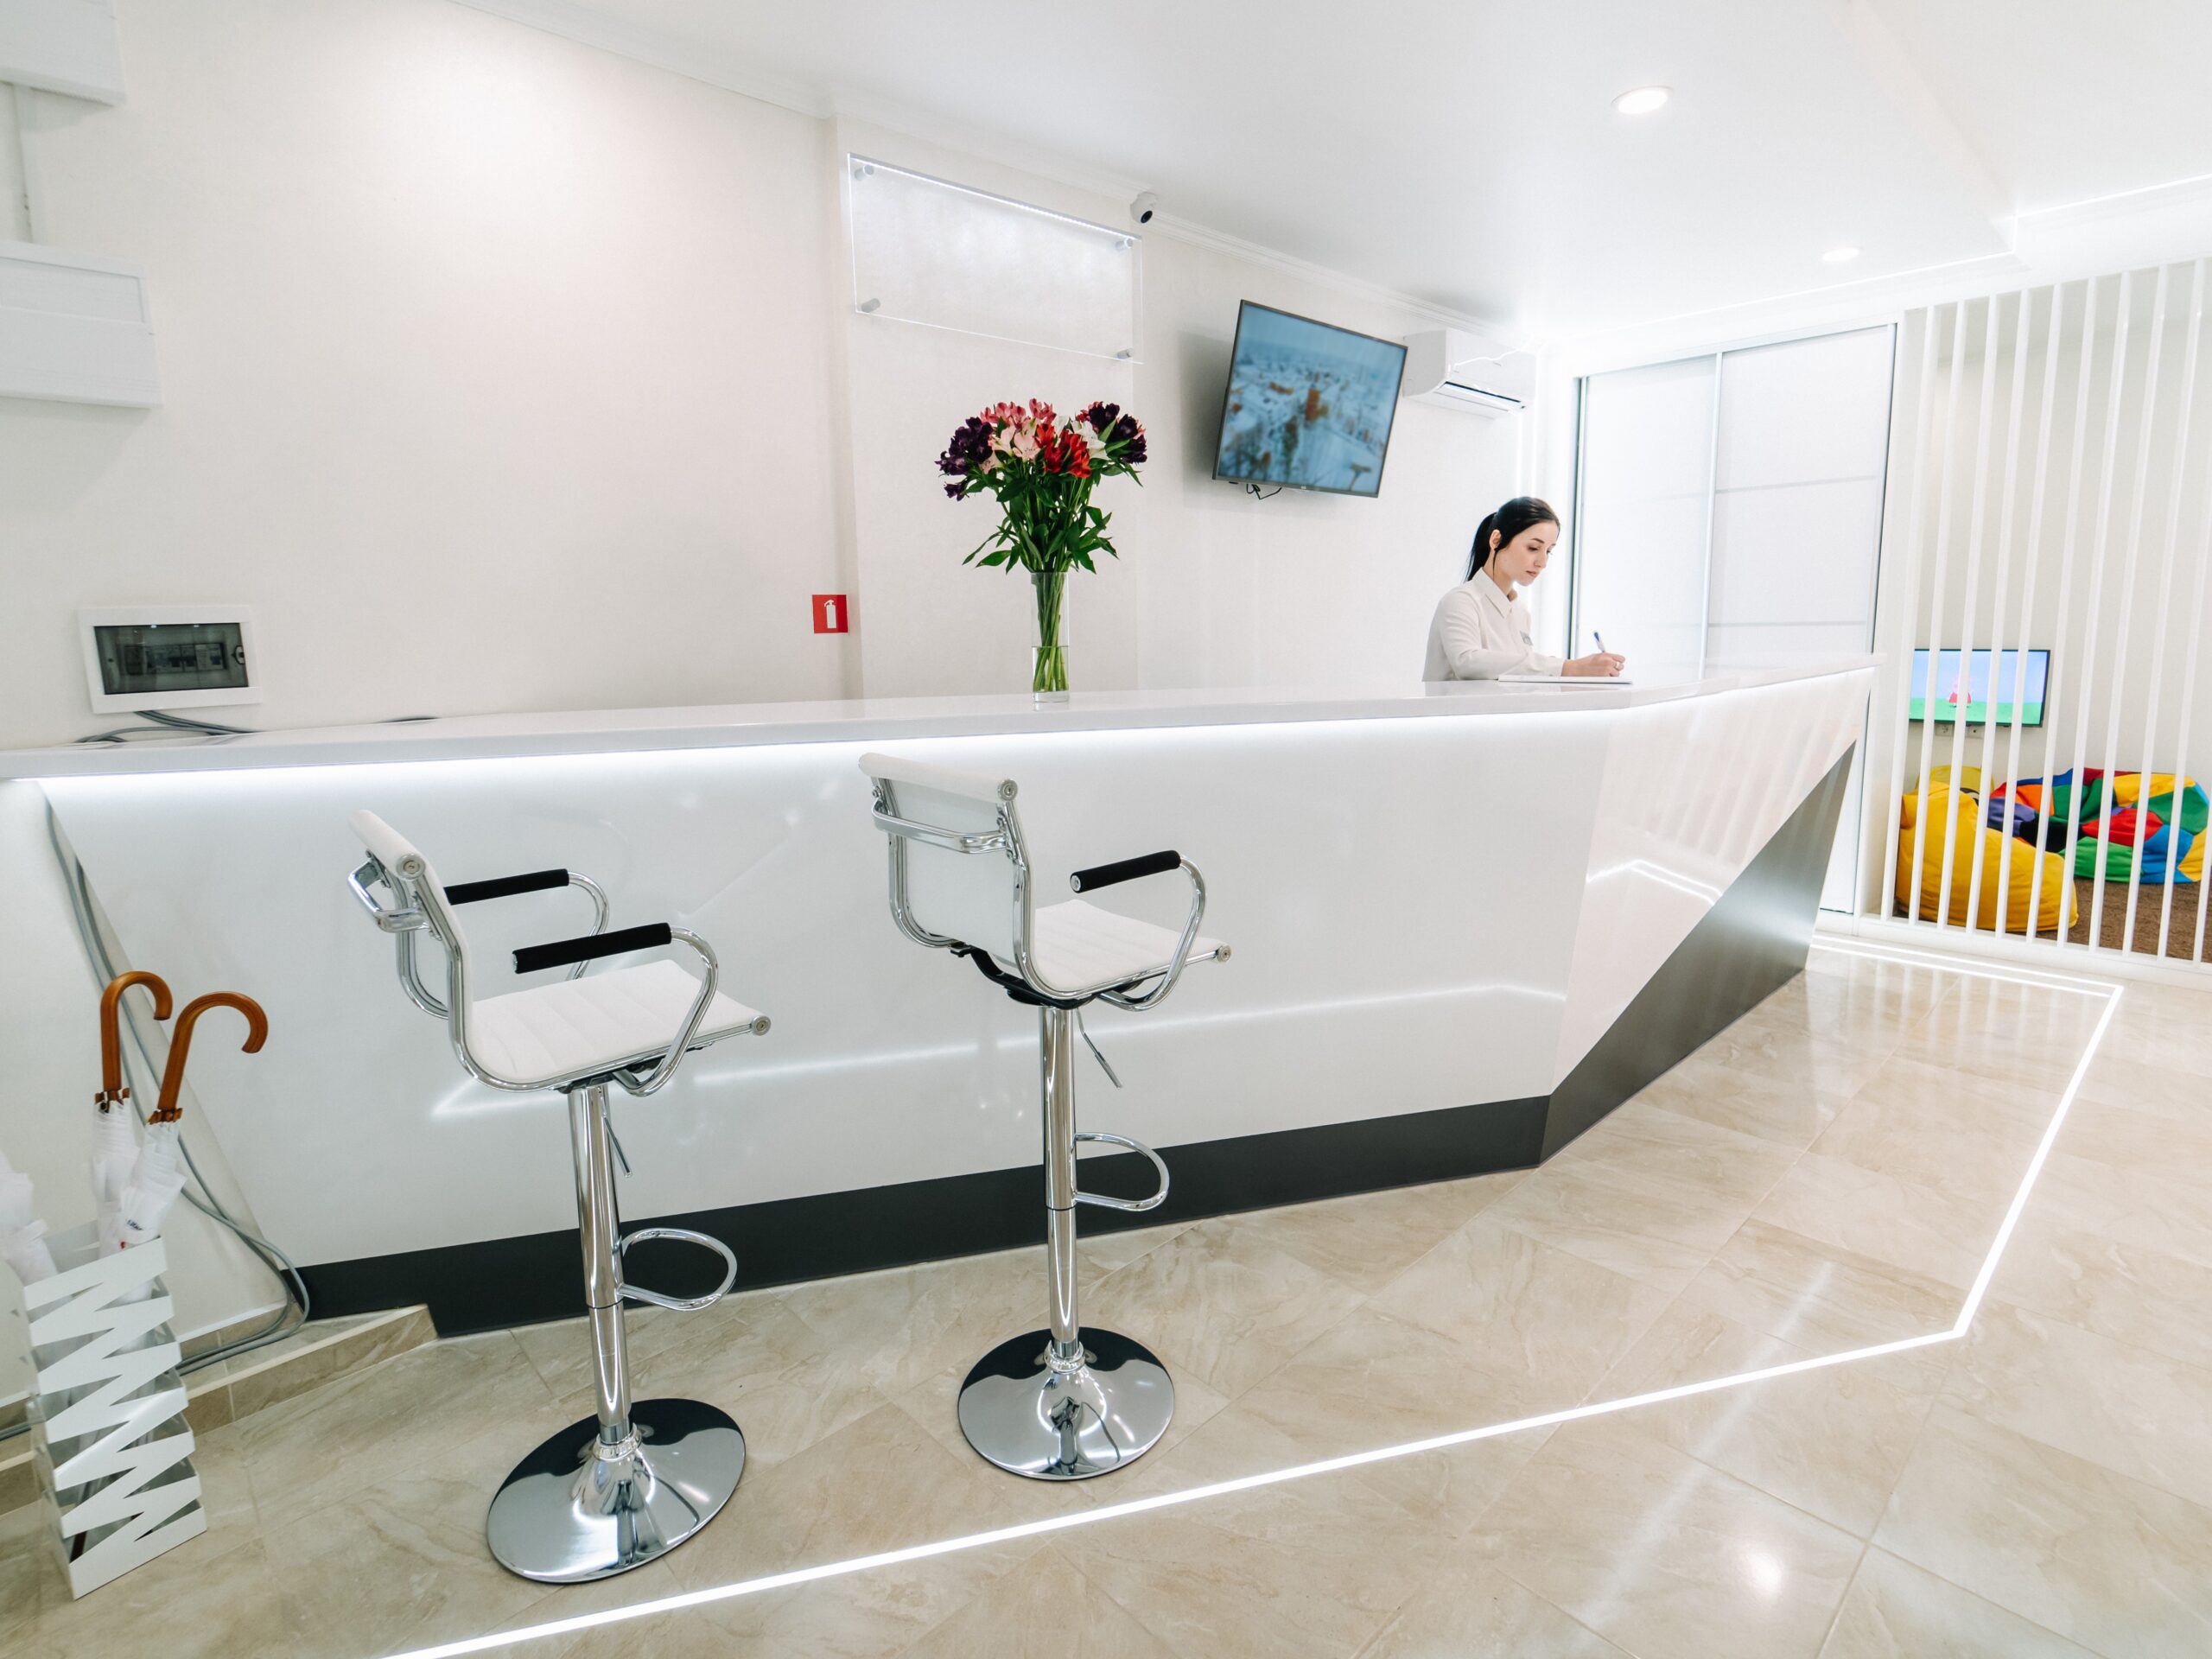 Reception area at the dental clinic. working place is with high chairs in white colors